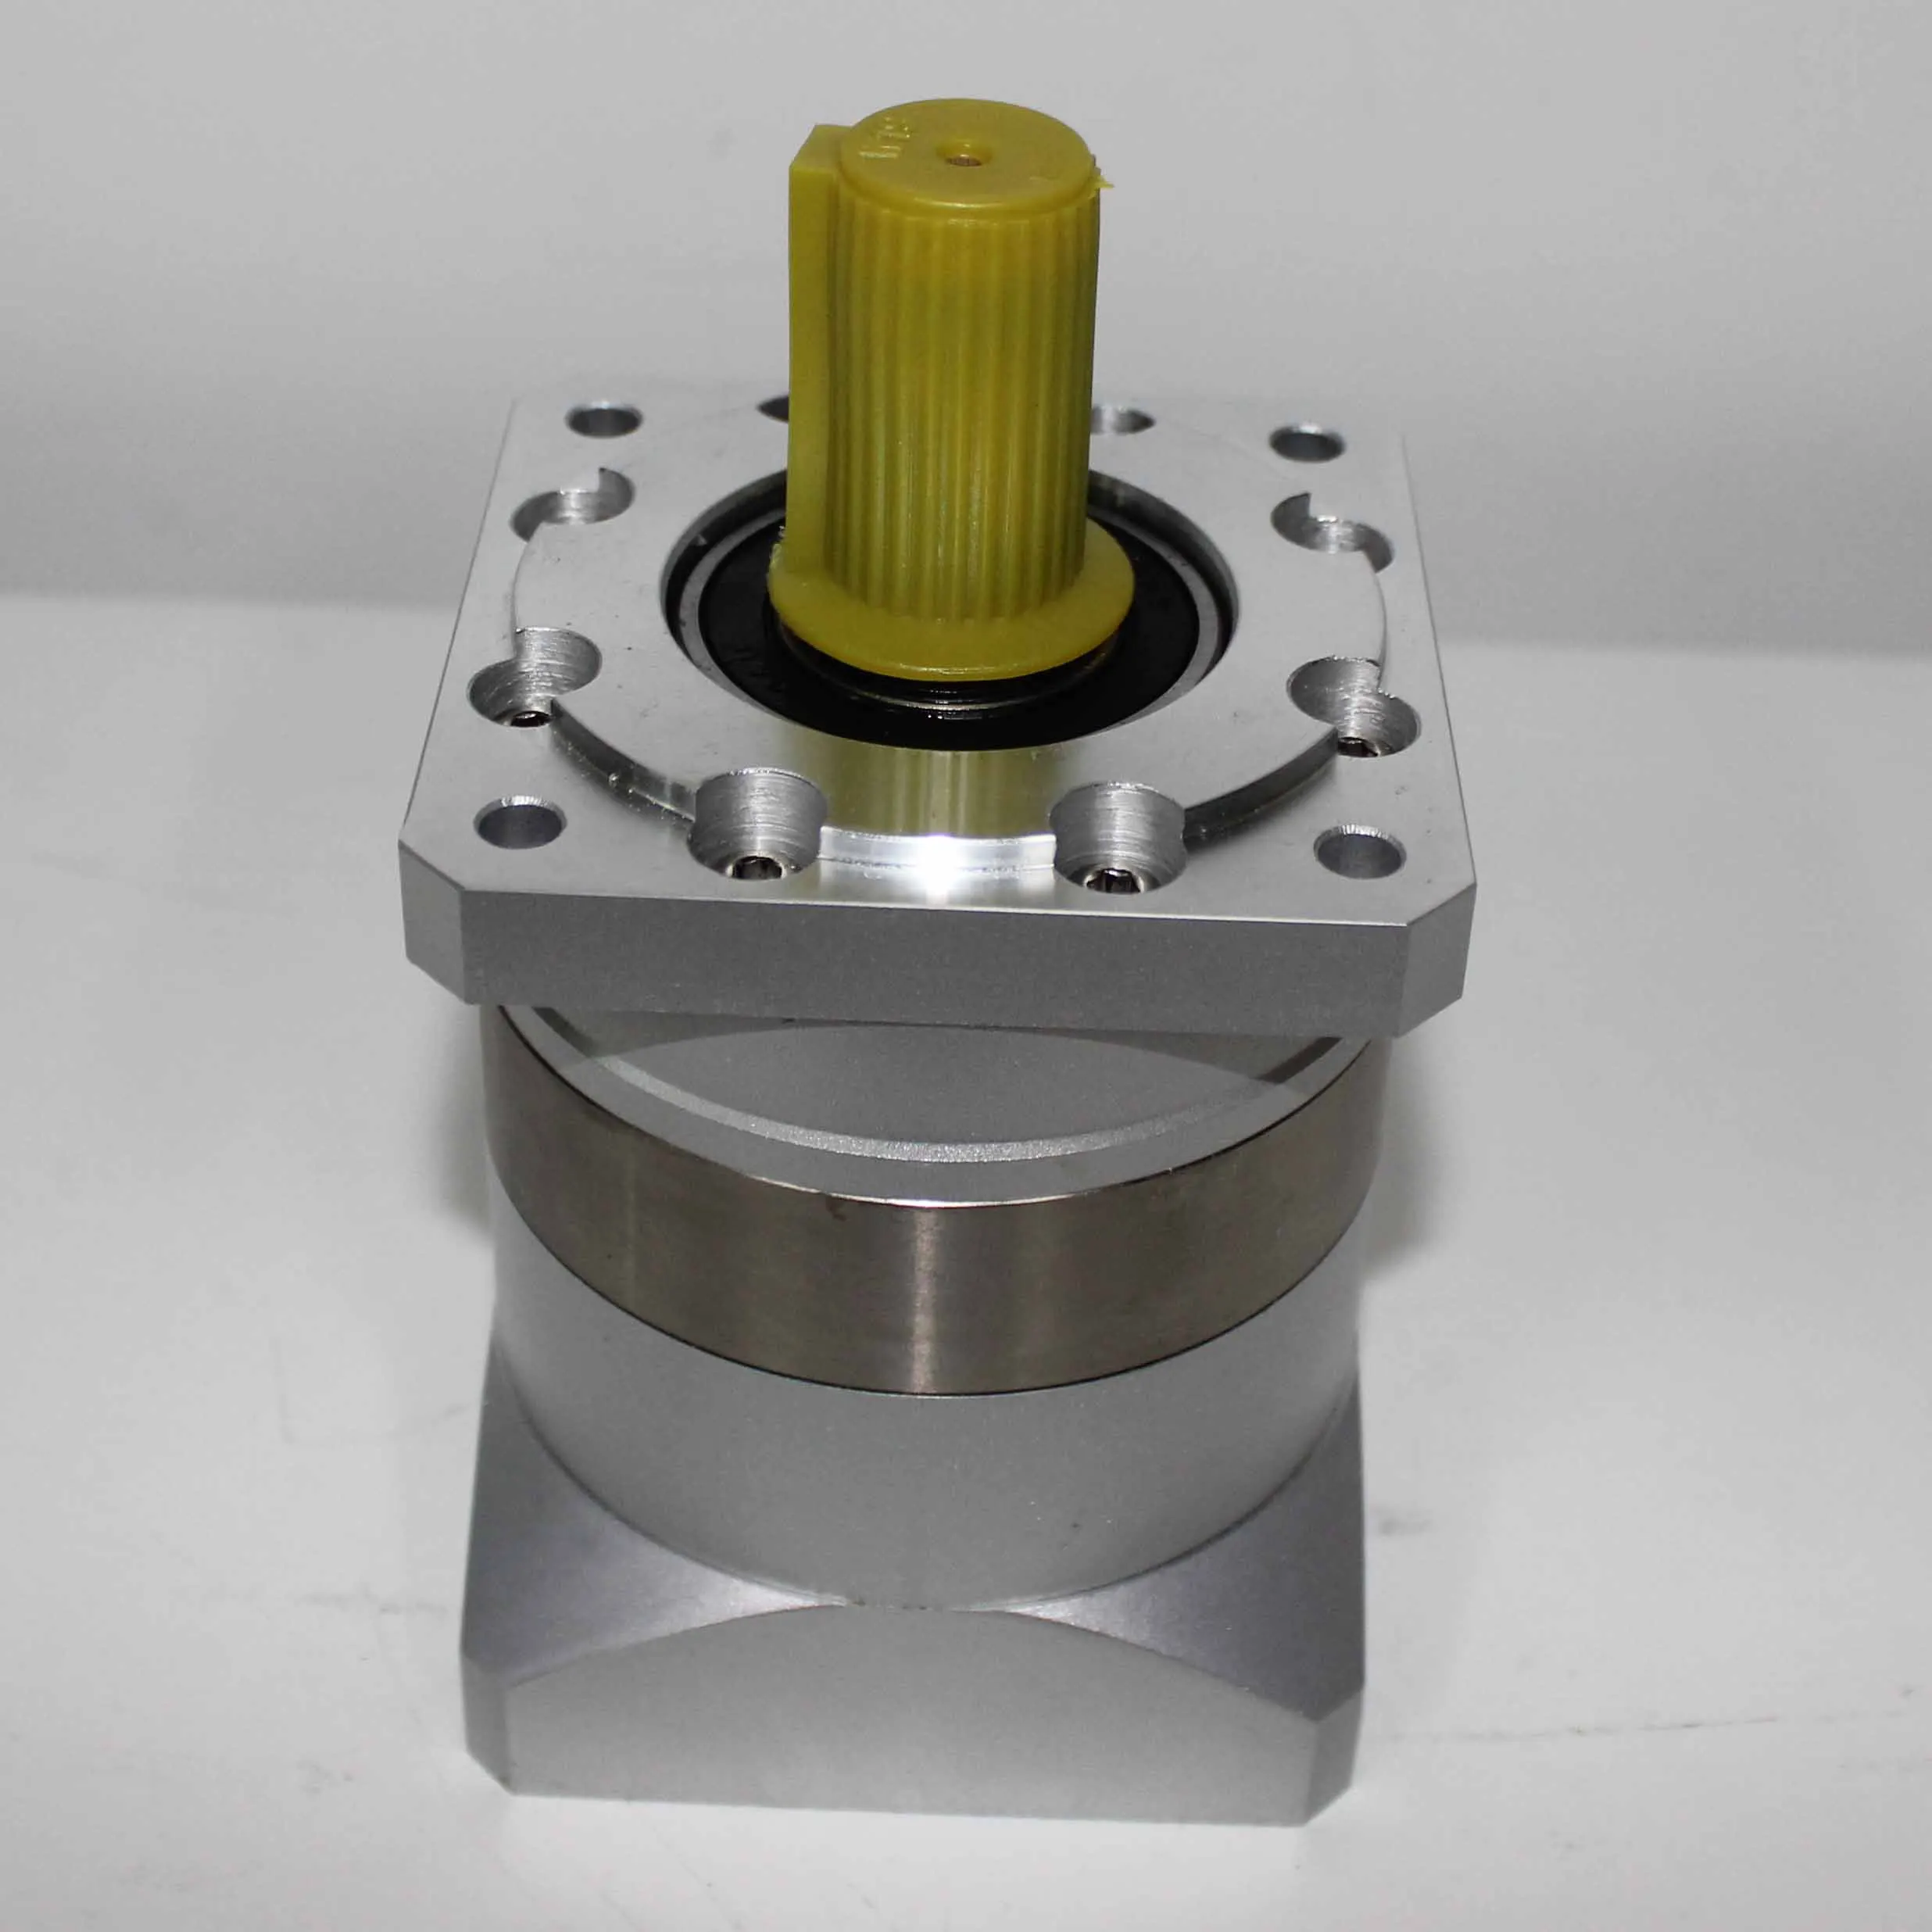 90mm Frame Size Planetary Reducer Gearbox PLF90 3:1 4:1 5:1 7:1 10:1 first stage gear ratio for Lichuan stepper and servo system (62491034673)